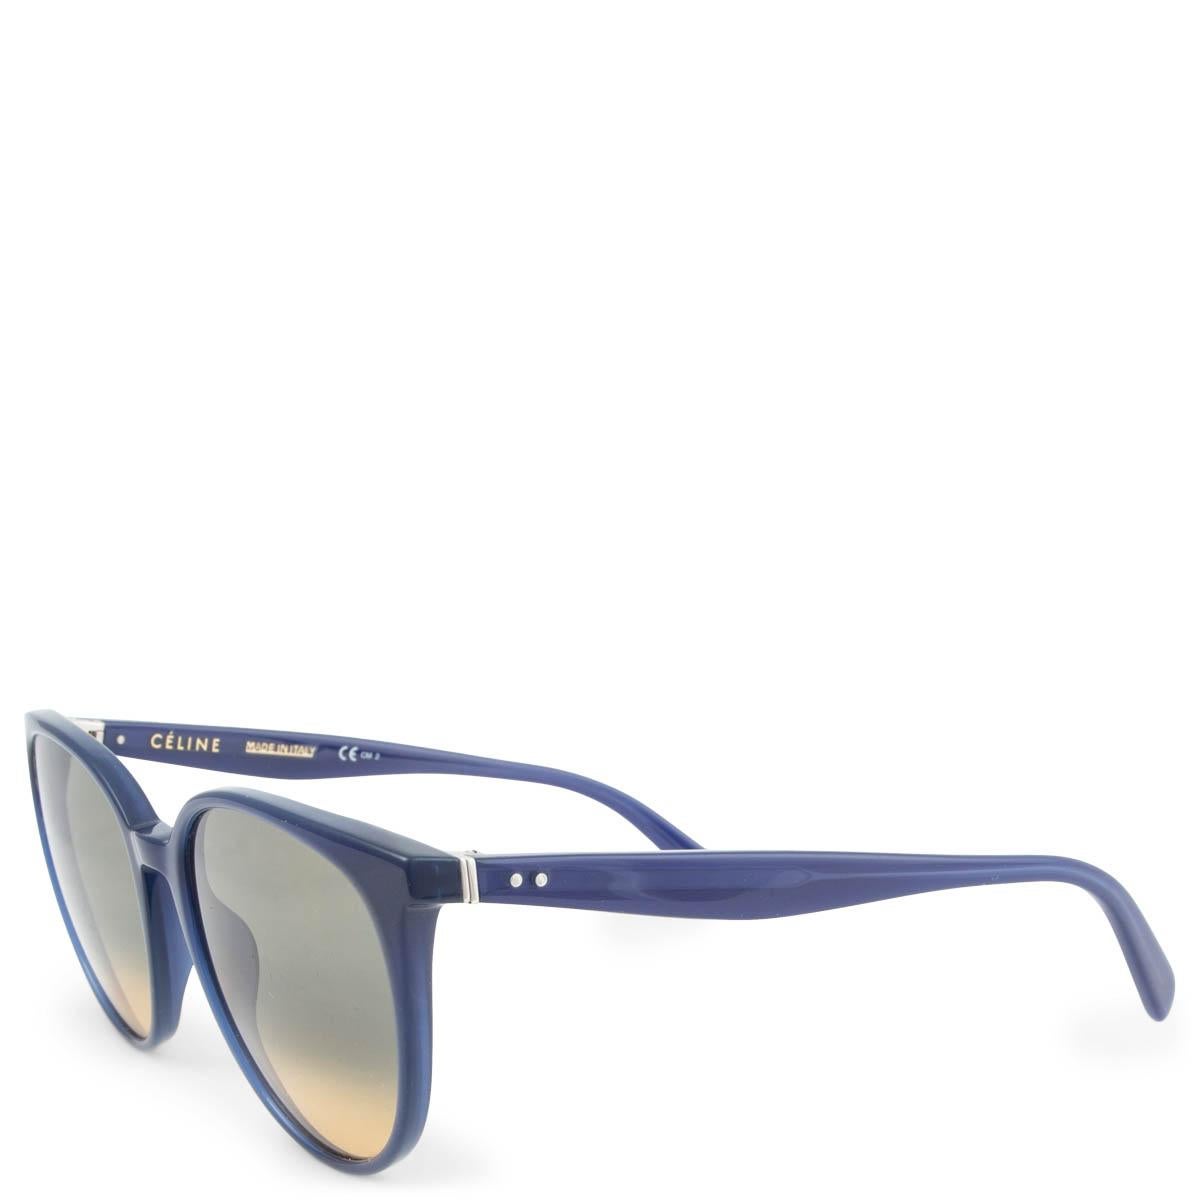 100% authentic Céline CL 41068/S in navy blue acetate with grey and beige gradient lenses. Have been worn and show a few scratches on the lenses. 

Measurements
Model	CL 41068/S
Width	14cm (5.5in)
Height	5.2cm (2in)

All our listings include only